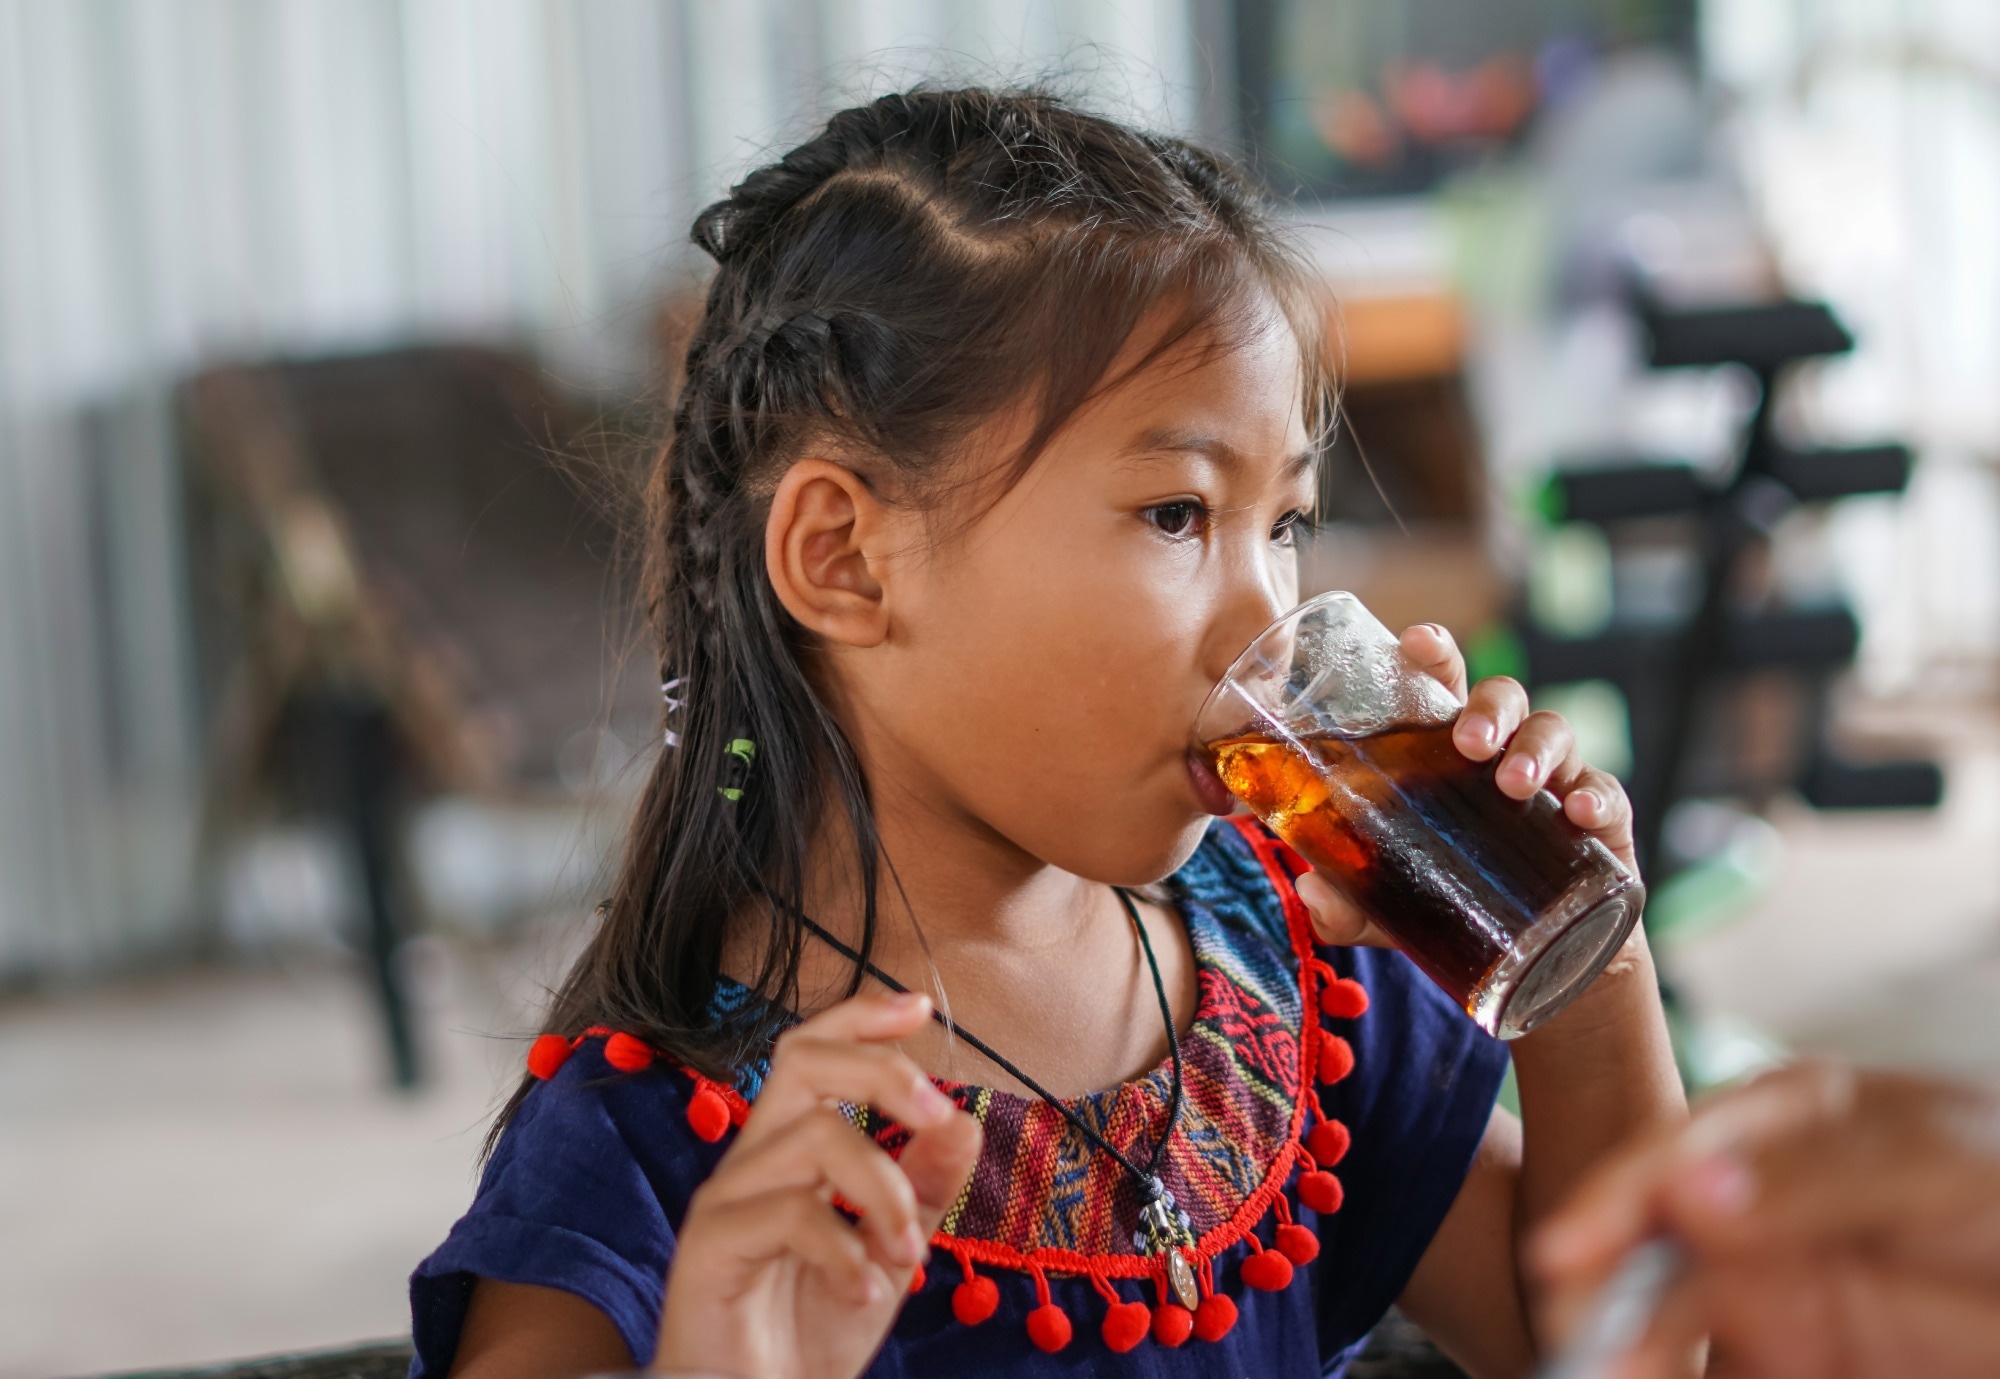 Study: Household Food Security and Consumption of Sugar-Sweetened Beverages among New York City (NYC) Children: A Cross-Sectional Analysis of 2017 NYC Kids’ Data. Image Credit: Thaweesak Thipphamon / Shutterstock.com